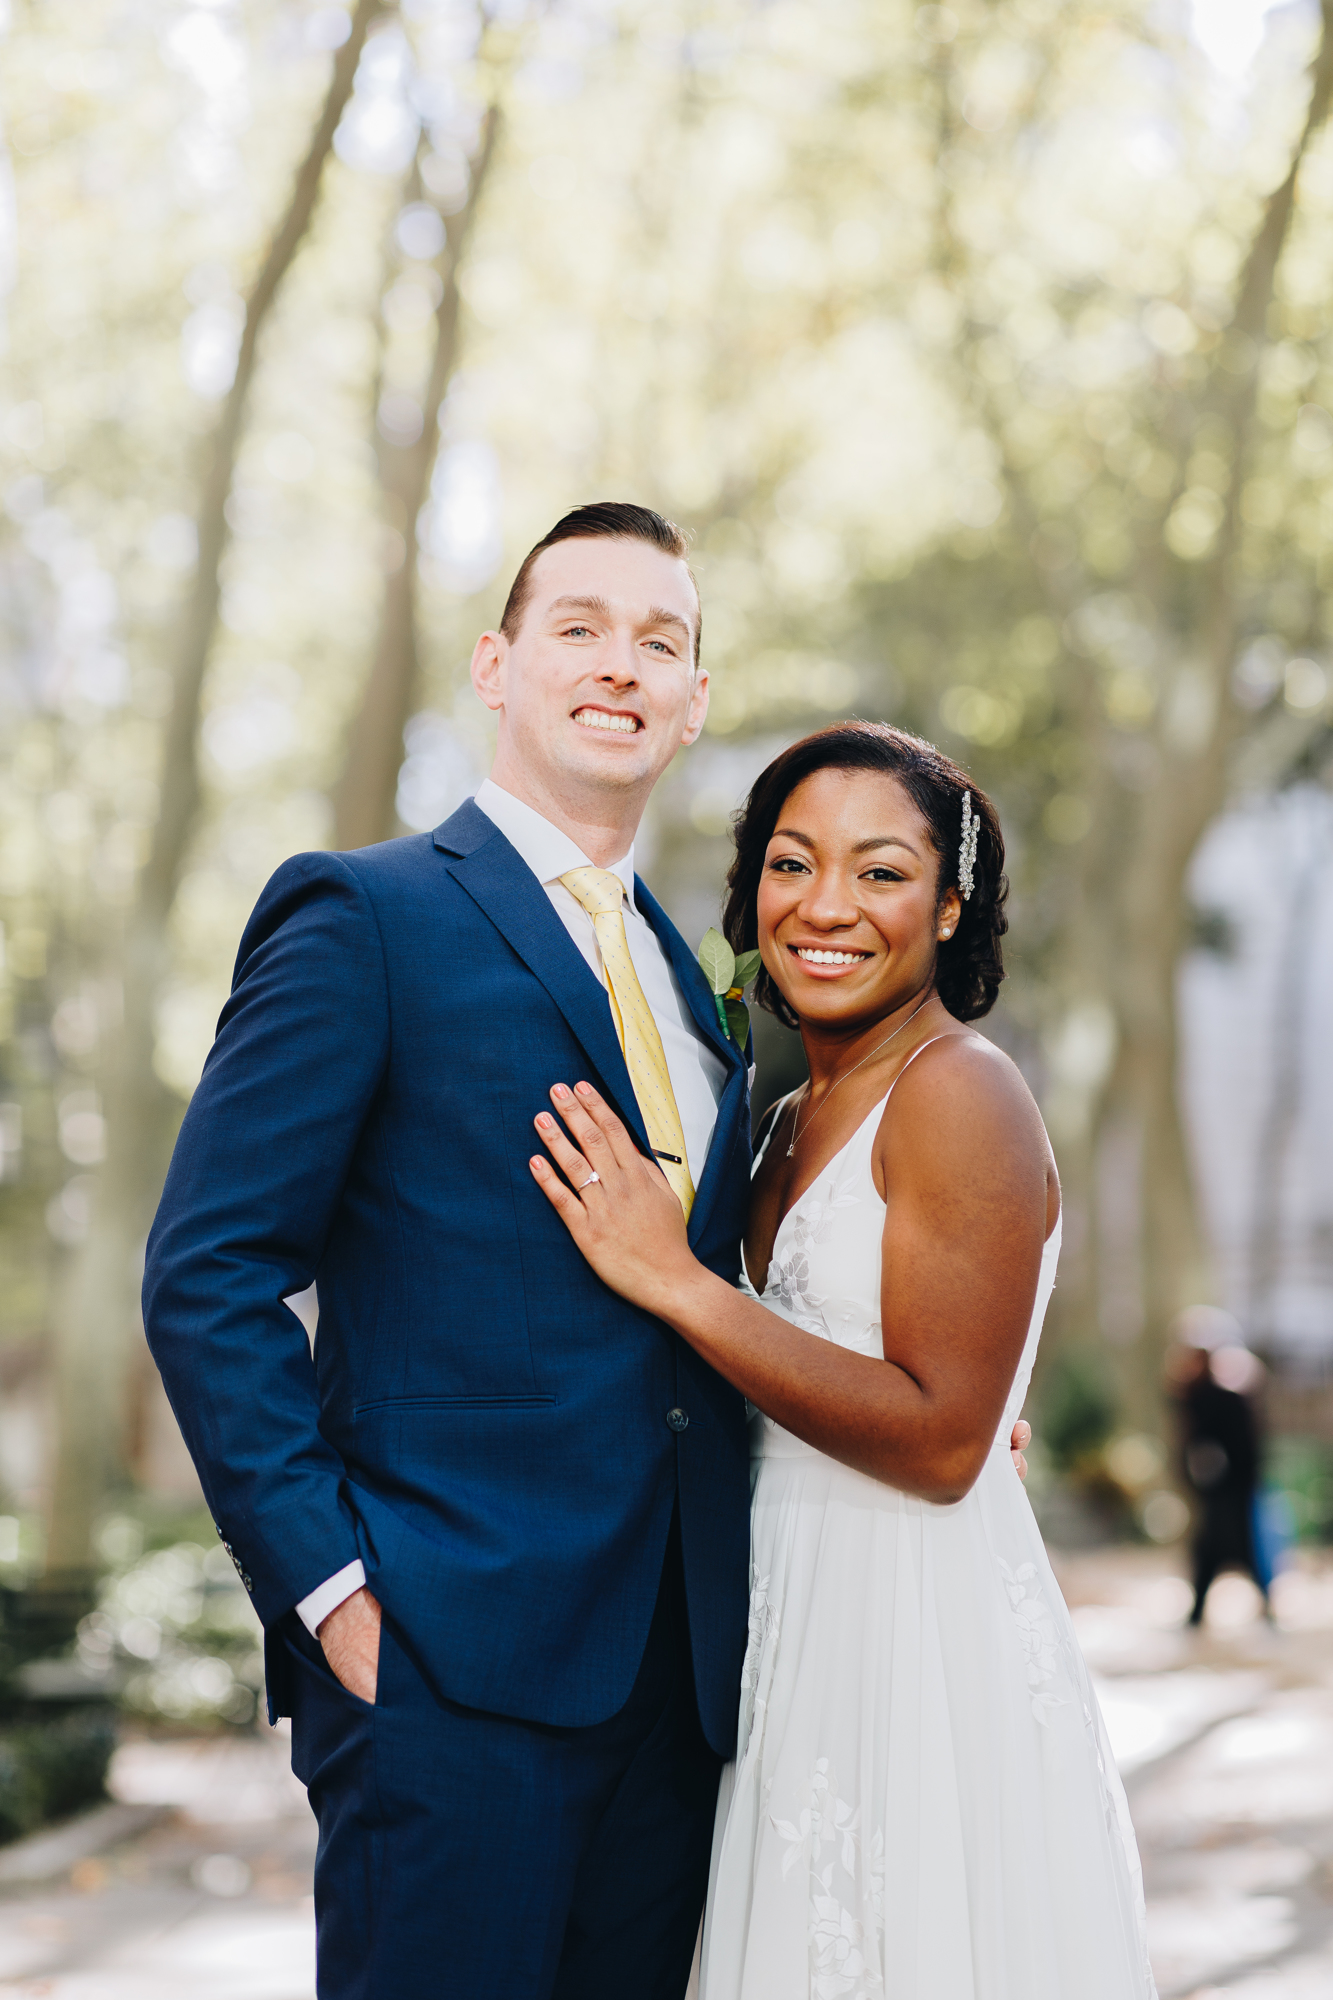 Morning Bryant Park Wedding Photos during NYC Elopement